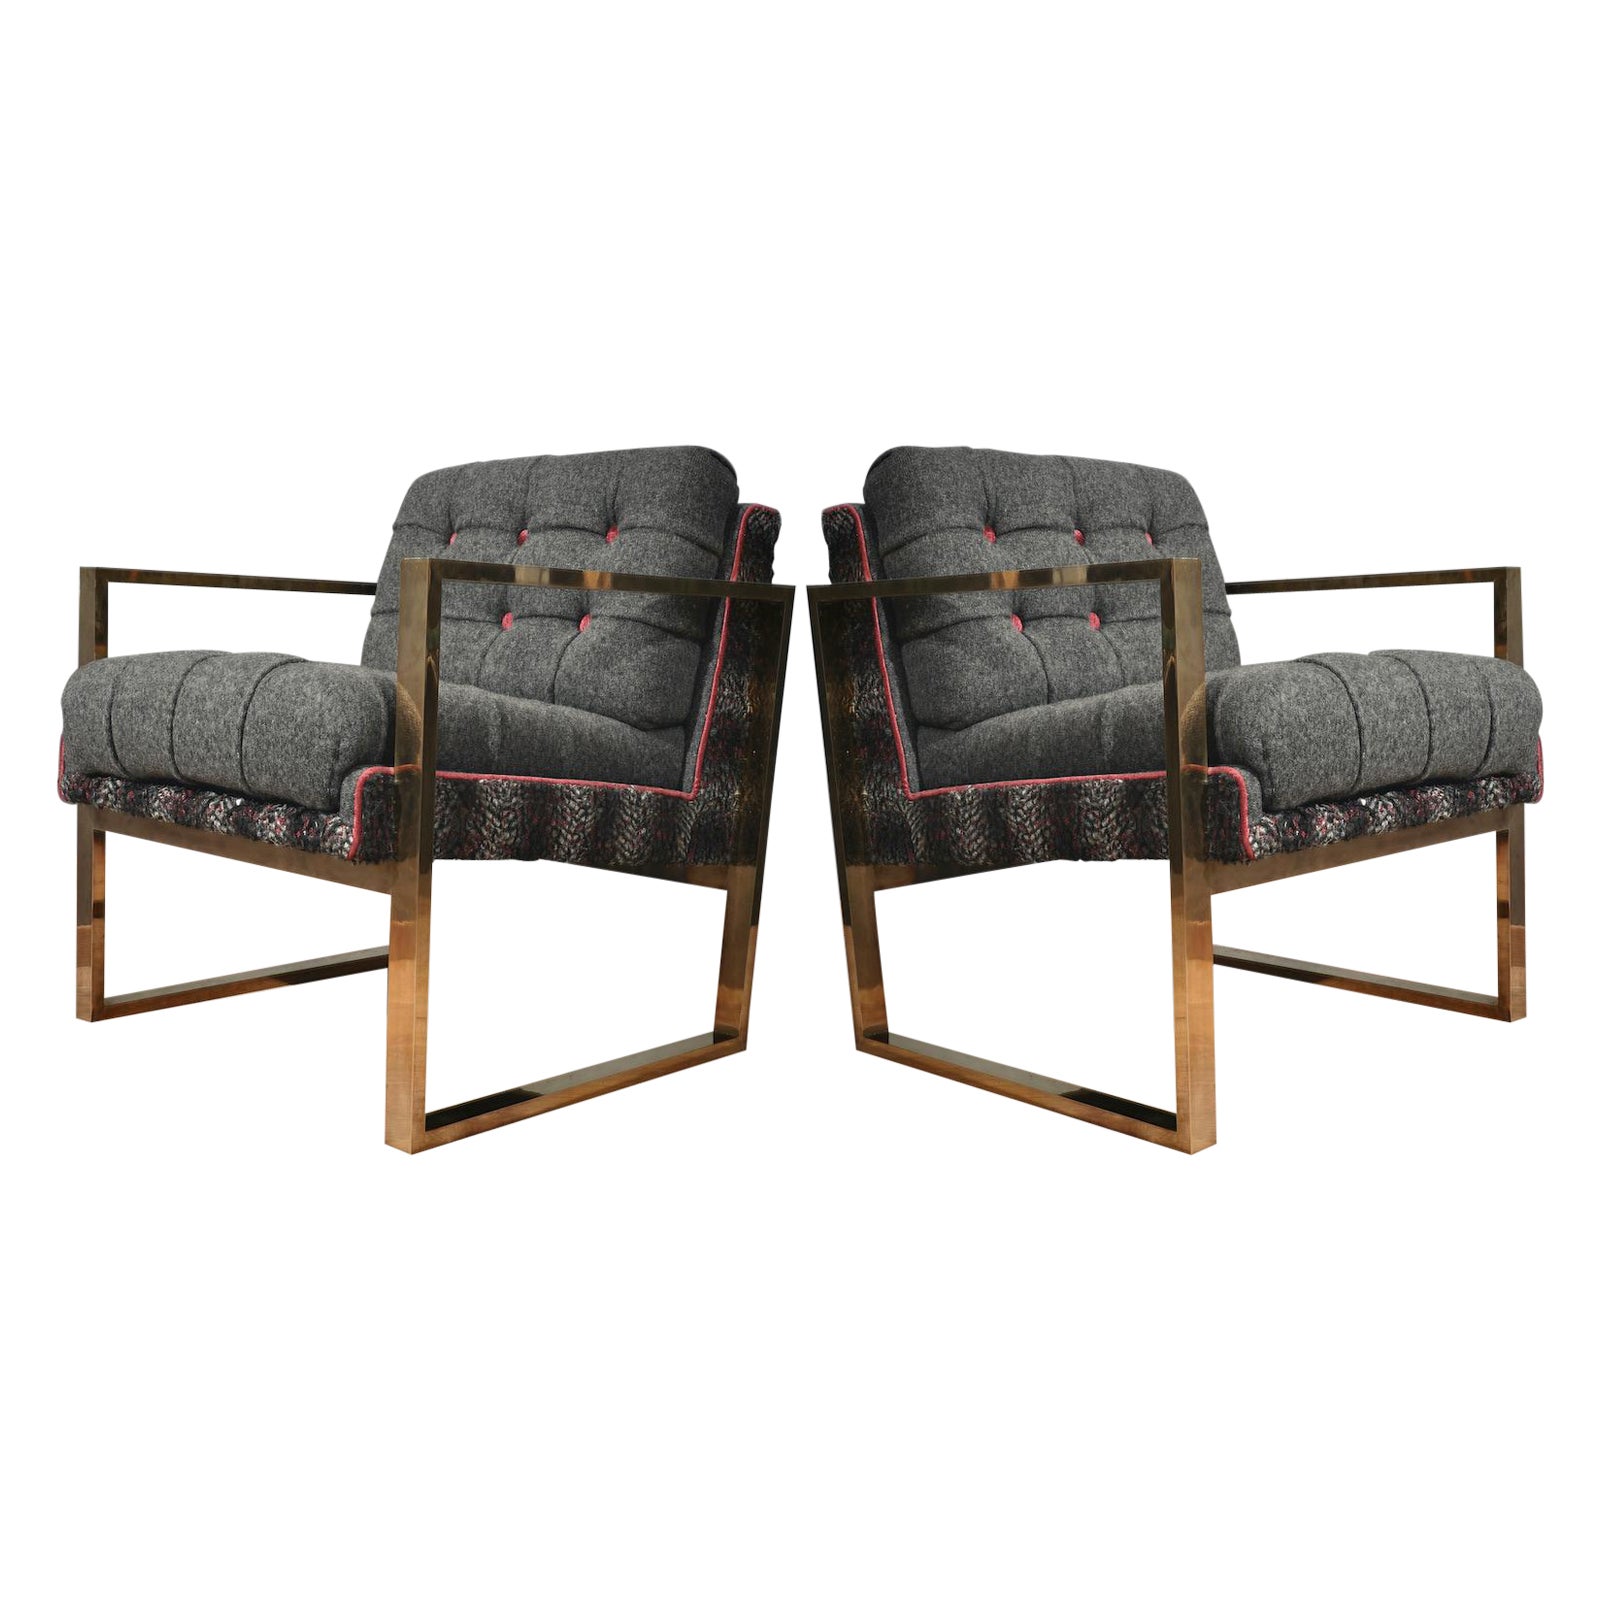 Pair of Midcentury Brass and Fabric Italian Armchairs, 1950 For Sale